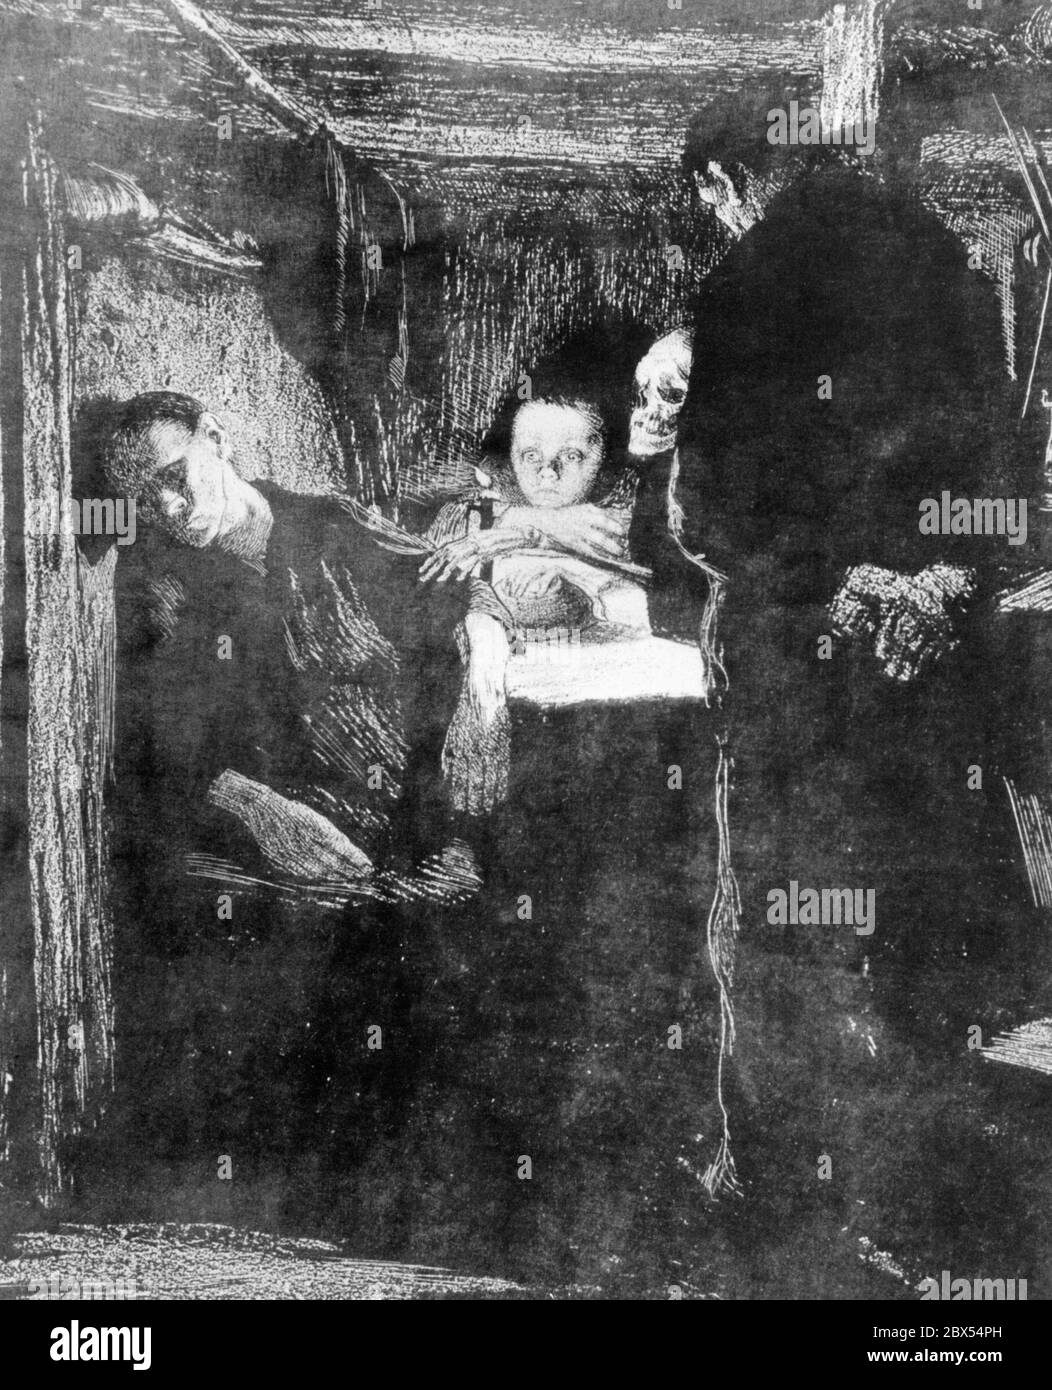 The small dark chamber is only lit by a candle. Two emaciated home weavers, a child and a skeleton sit around a small table. It shows the misery of the Silesian home weavers that led to the weavers' revolt. Lithograph from the Weavers' Cycle II. Stock Photo